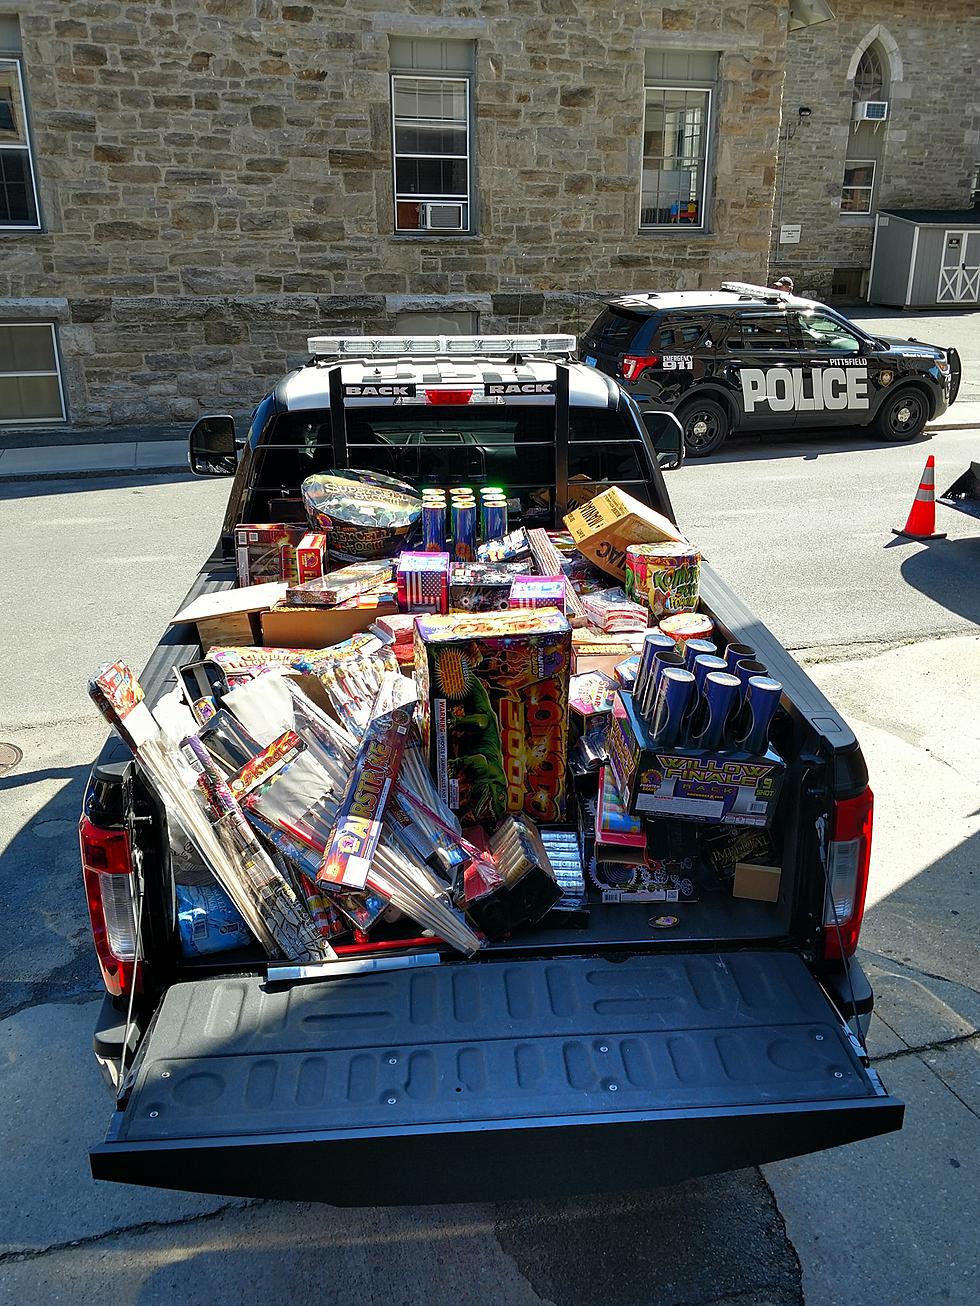 Can You Get Arrested For Possessing Fireworks In Massachusetts?